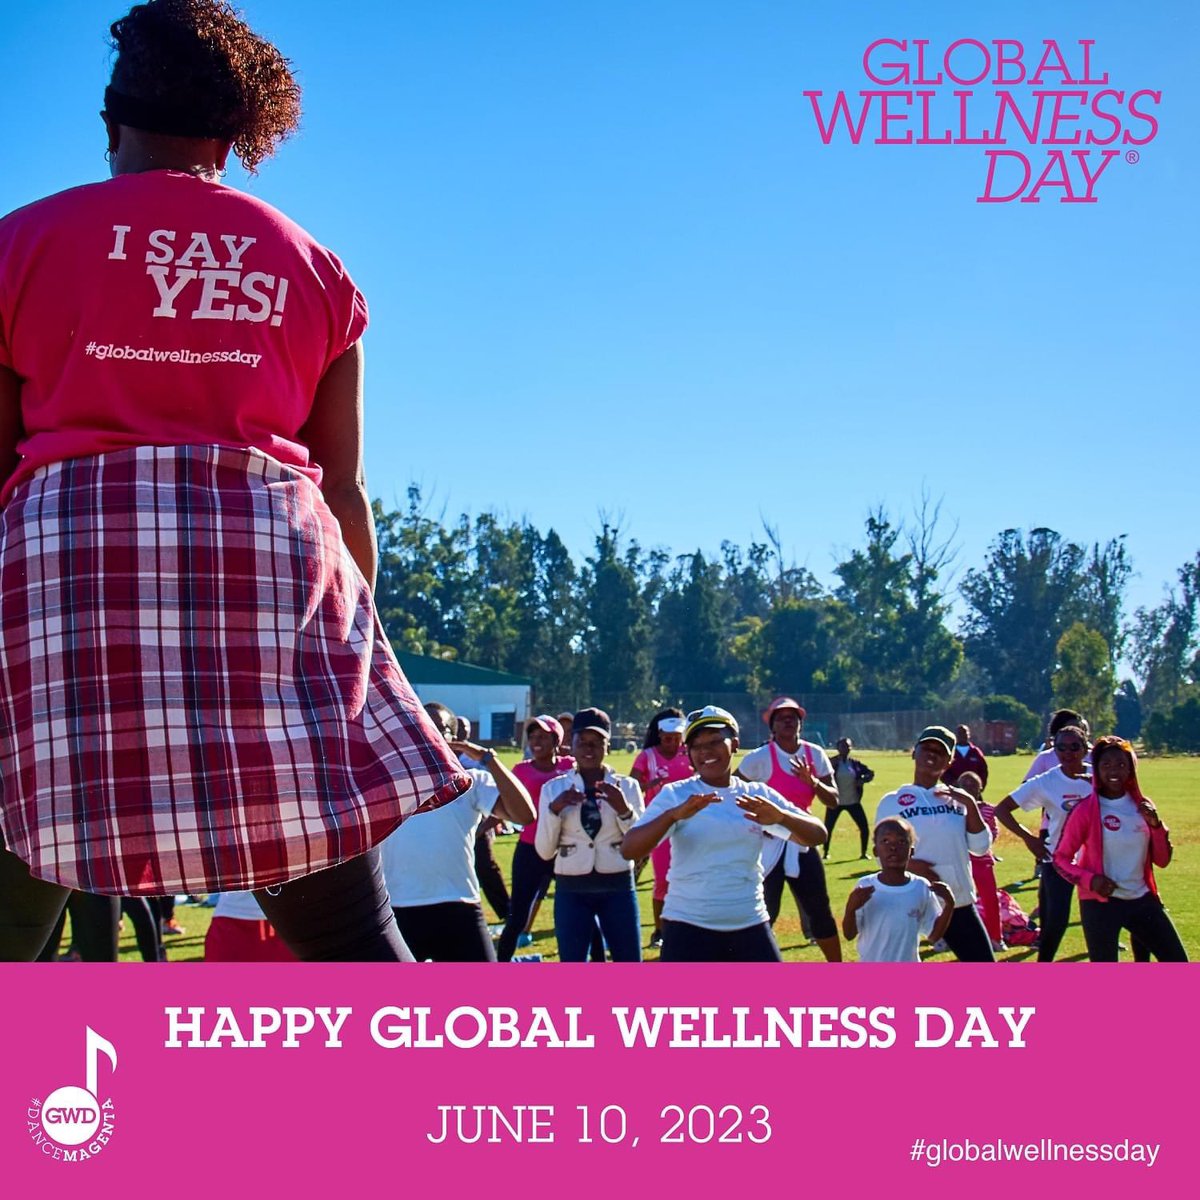 Happy Global Wellness Day!!!! Remember 'One day can change your whole life!'

#globalwellnessday #dancemagenta #gwd2023 #wellness #happyglobalwellnessday #CIDESCOInternational